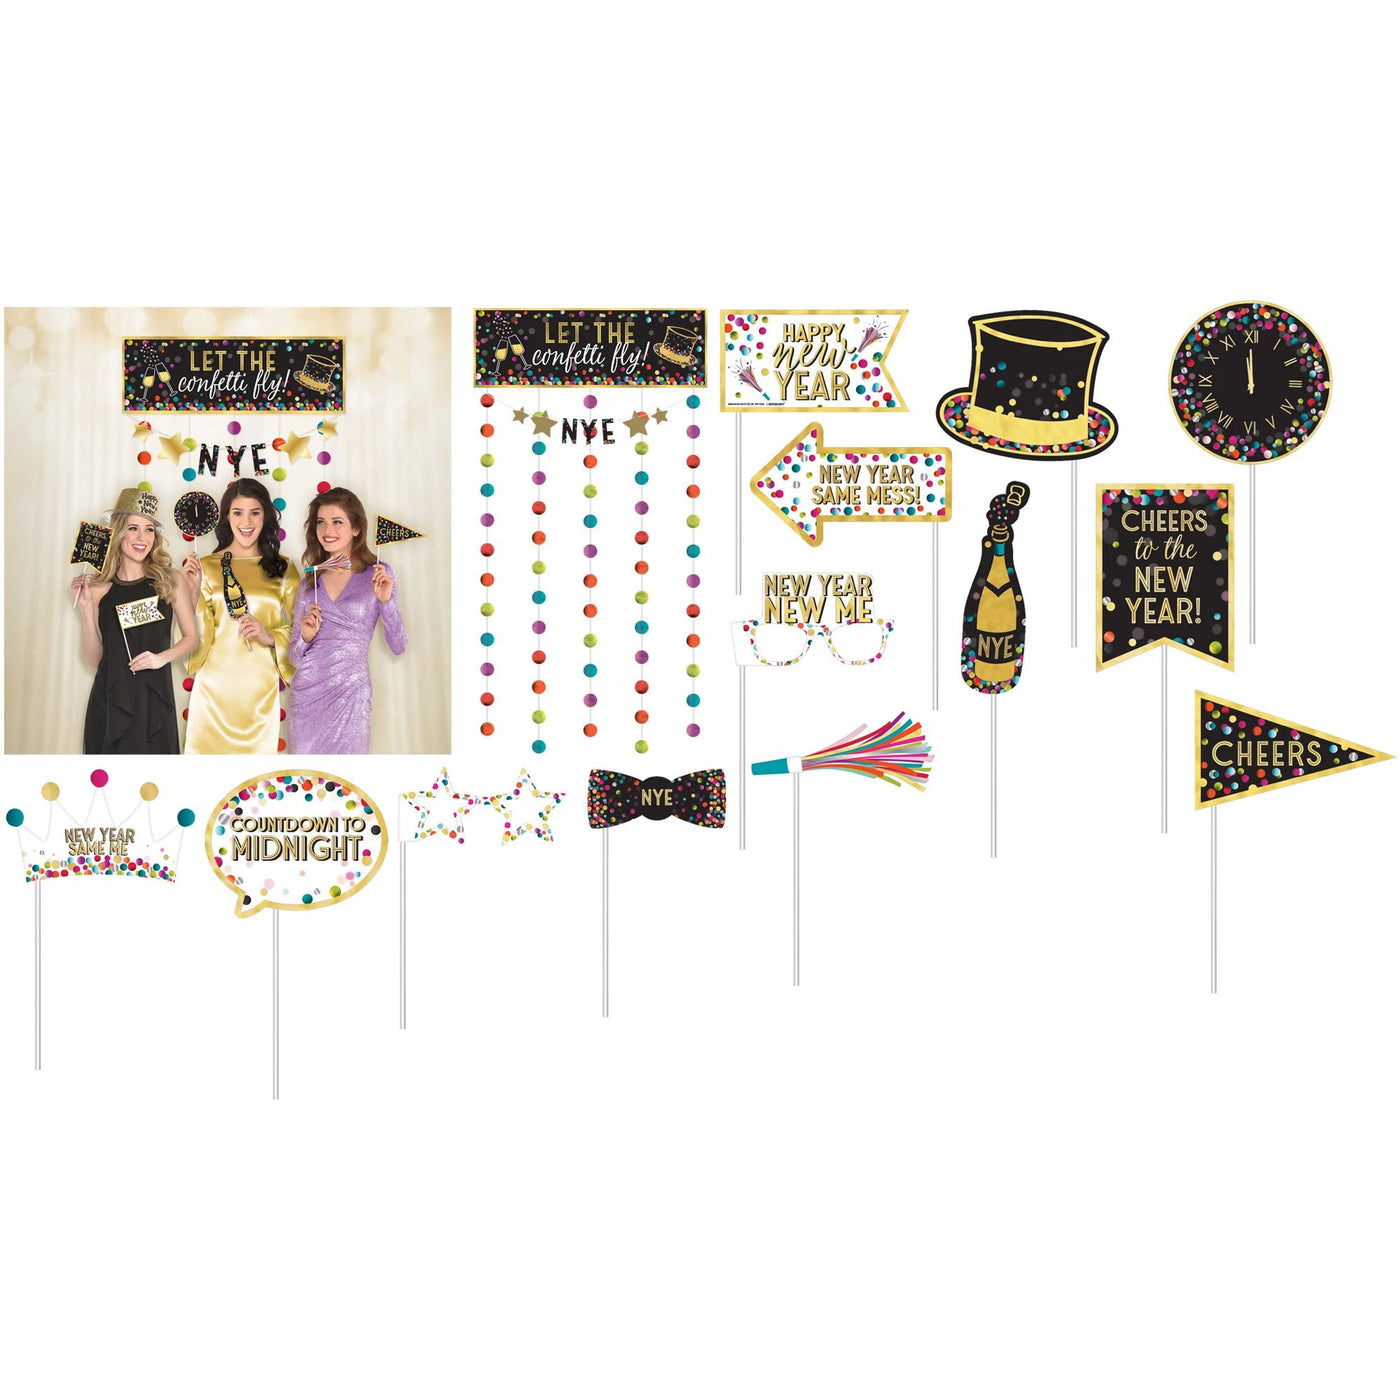 New Years Photo Booth Kit